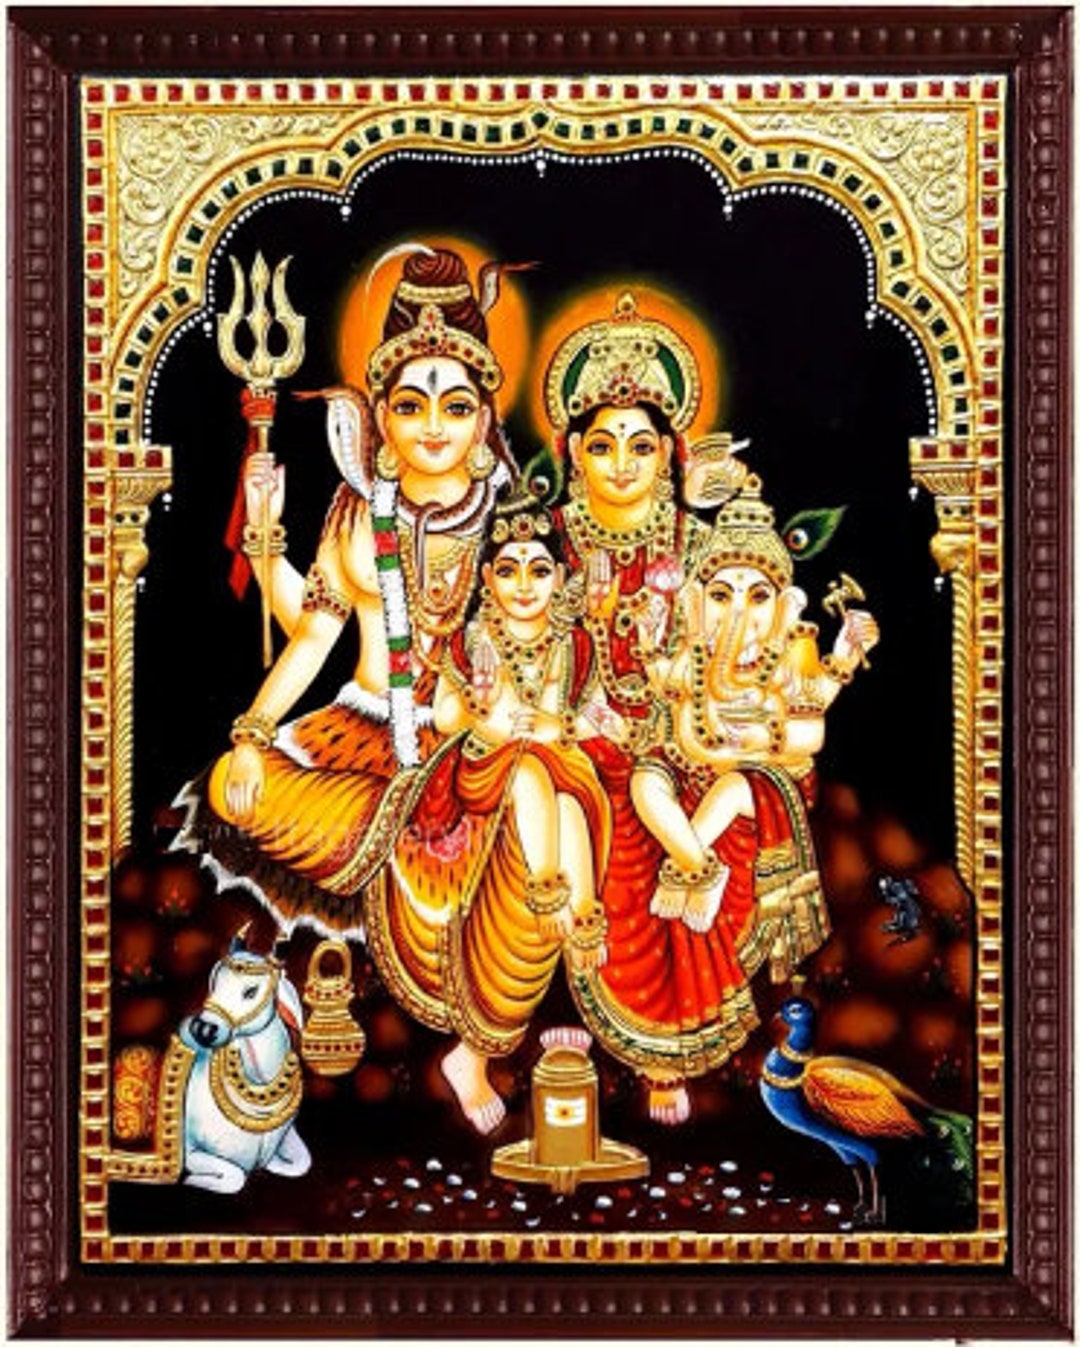 Buy Shiva Family Tanjore Painting With Frame Online in India - Etsy